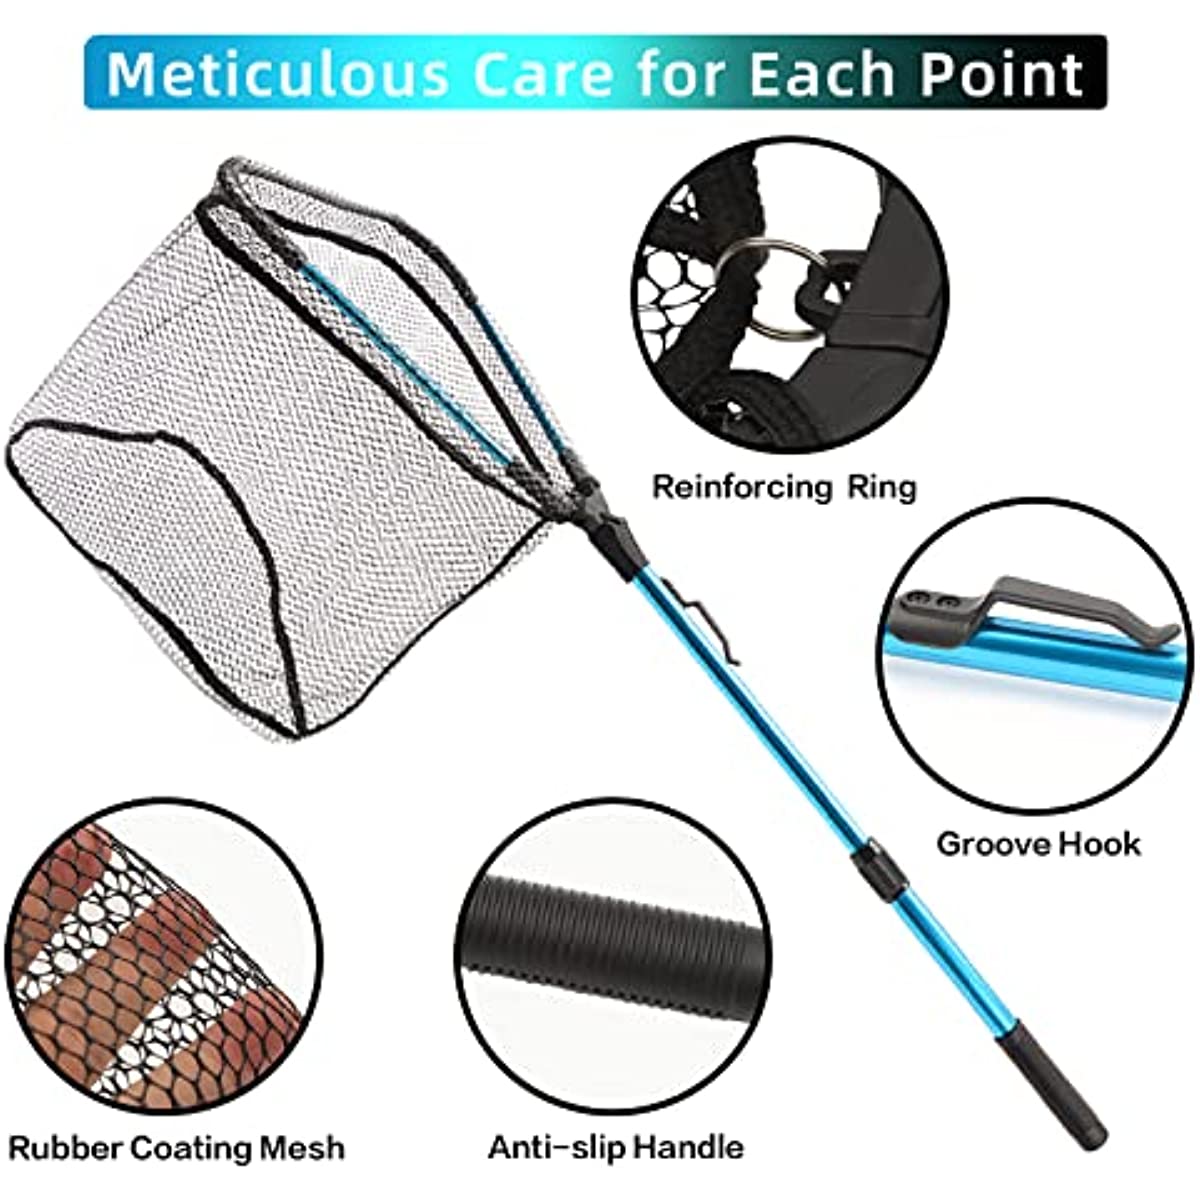 Durable Collapsible Fishing Net - Telescopic Pole Handle, Knot Less Mesh,  Rubber Coating - Safe Catching & Releasing!